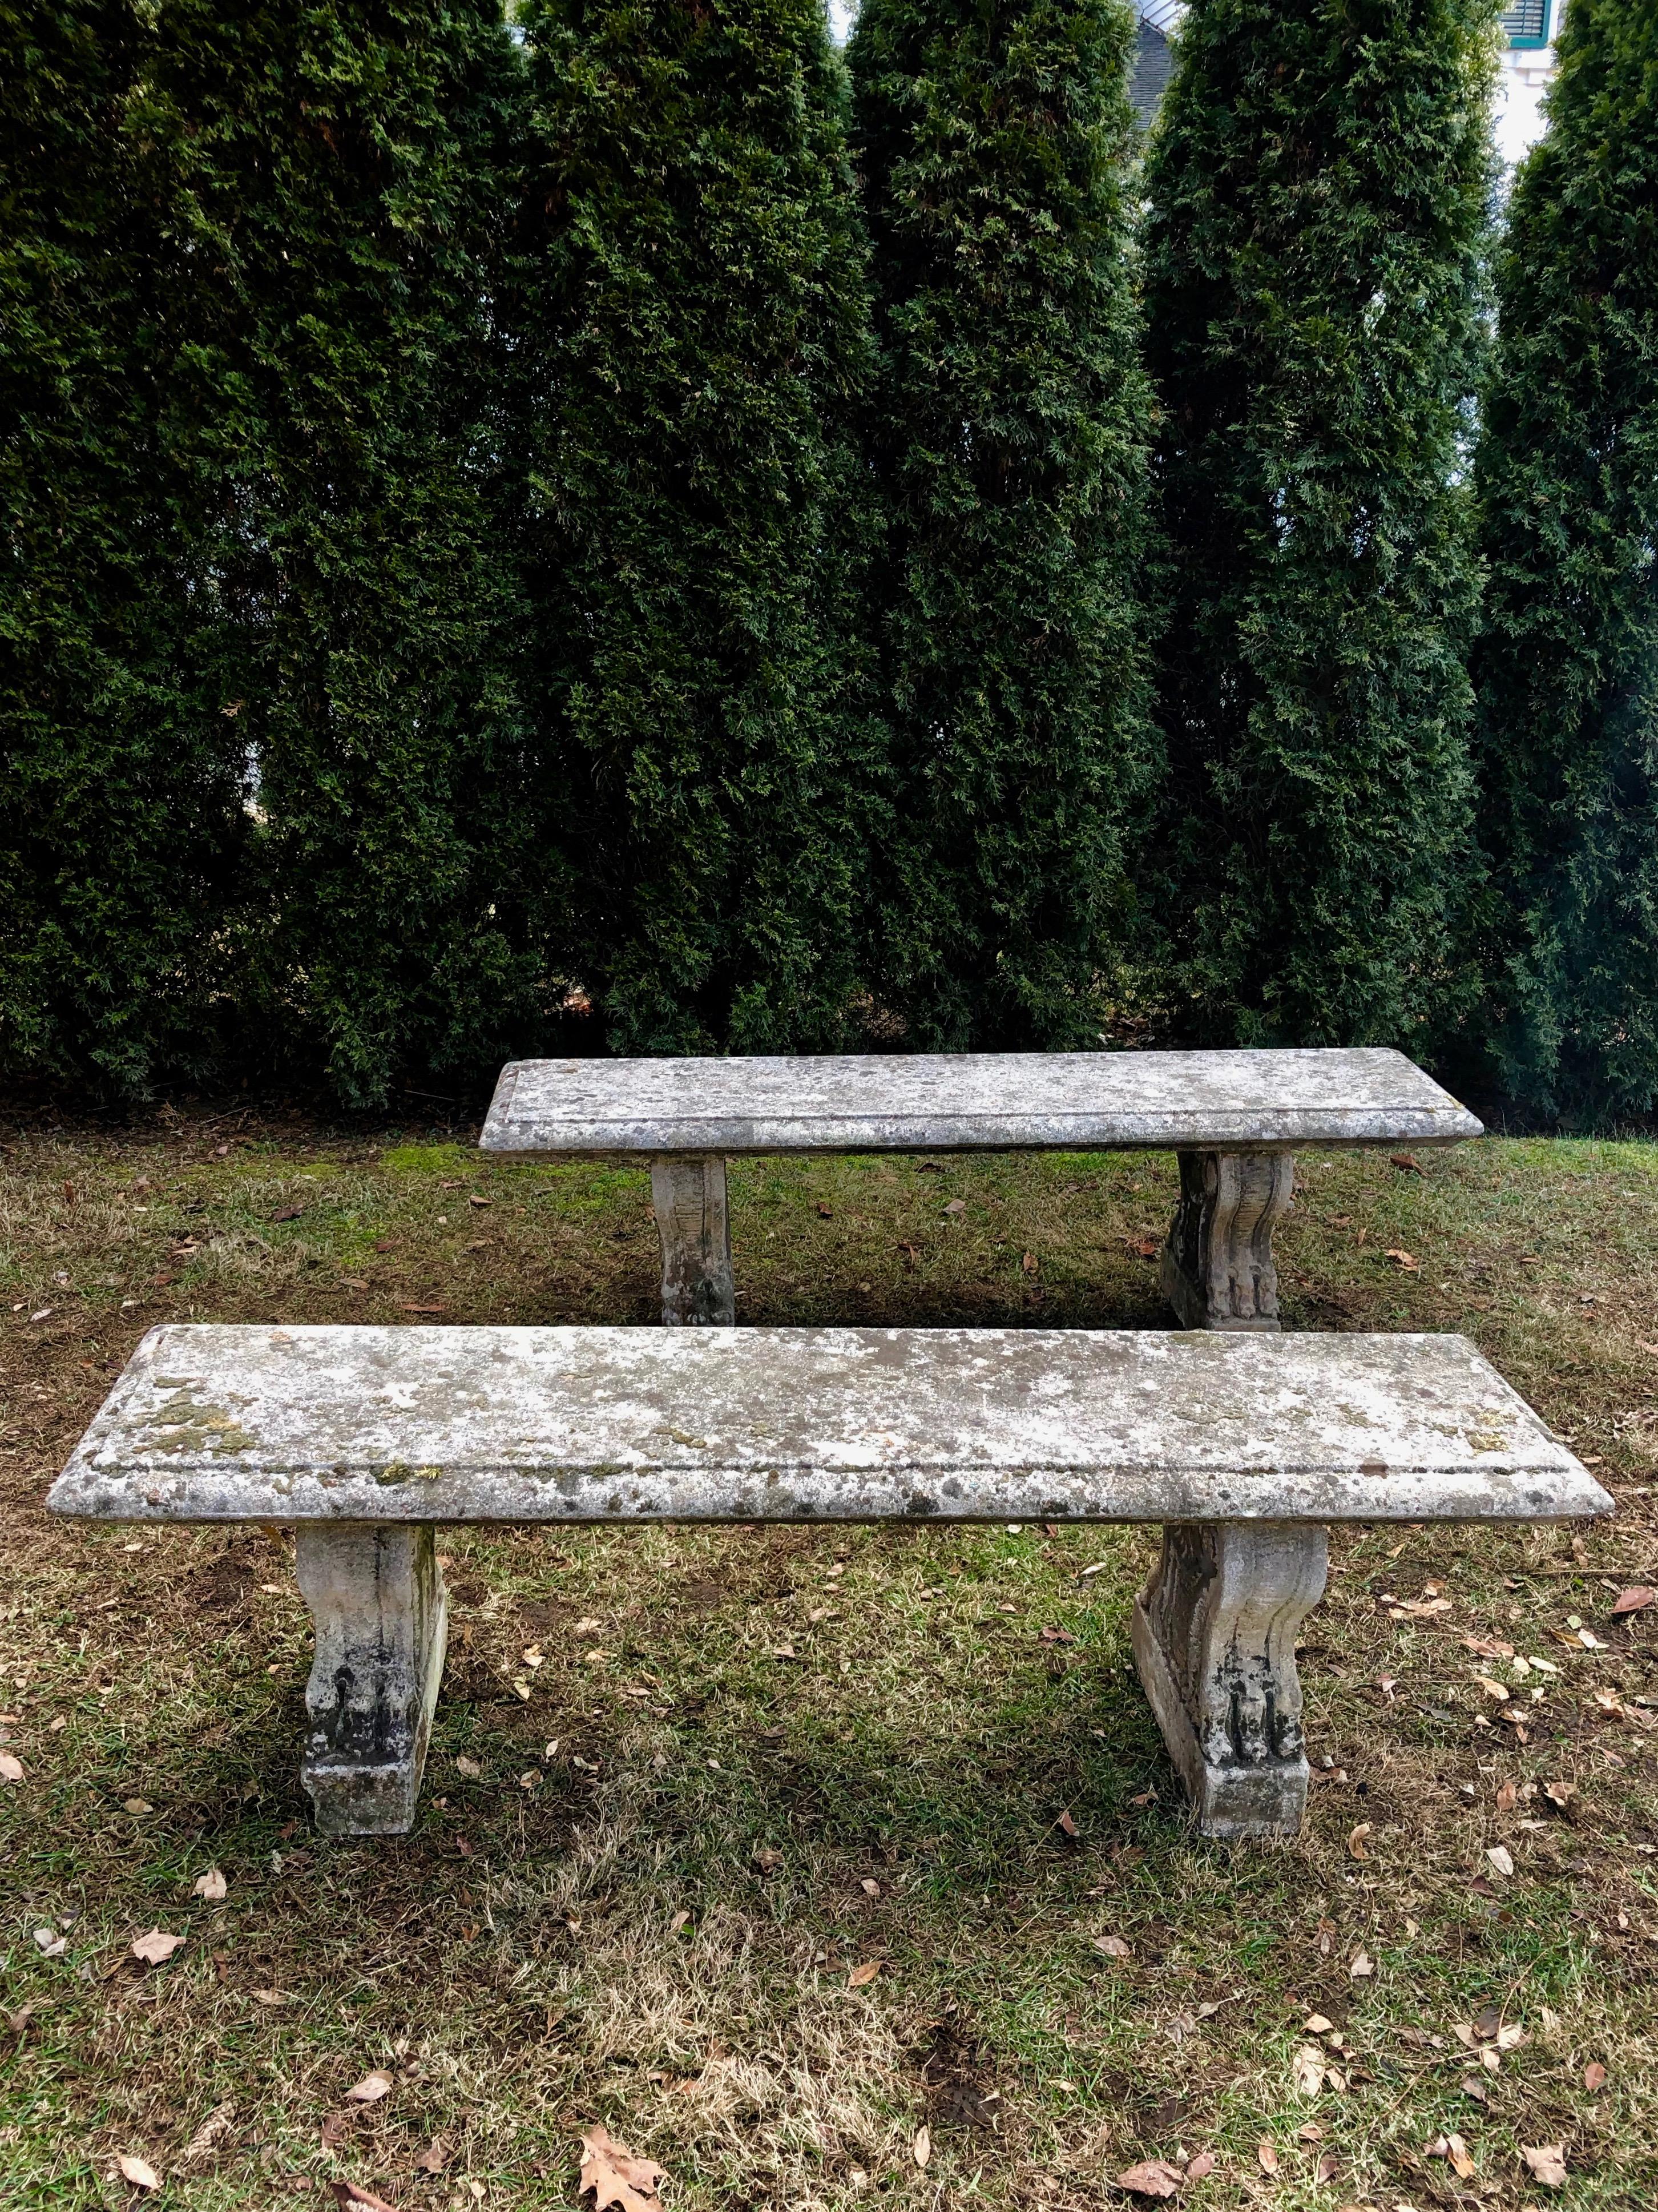 It is rare to find quality carved stone benches these days, let alone a pair, and these are beauties. With flanged edges to the tops and decoratively-carved volute and lions’ paw supports to both sides, these are exceptional in all respects. The